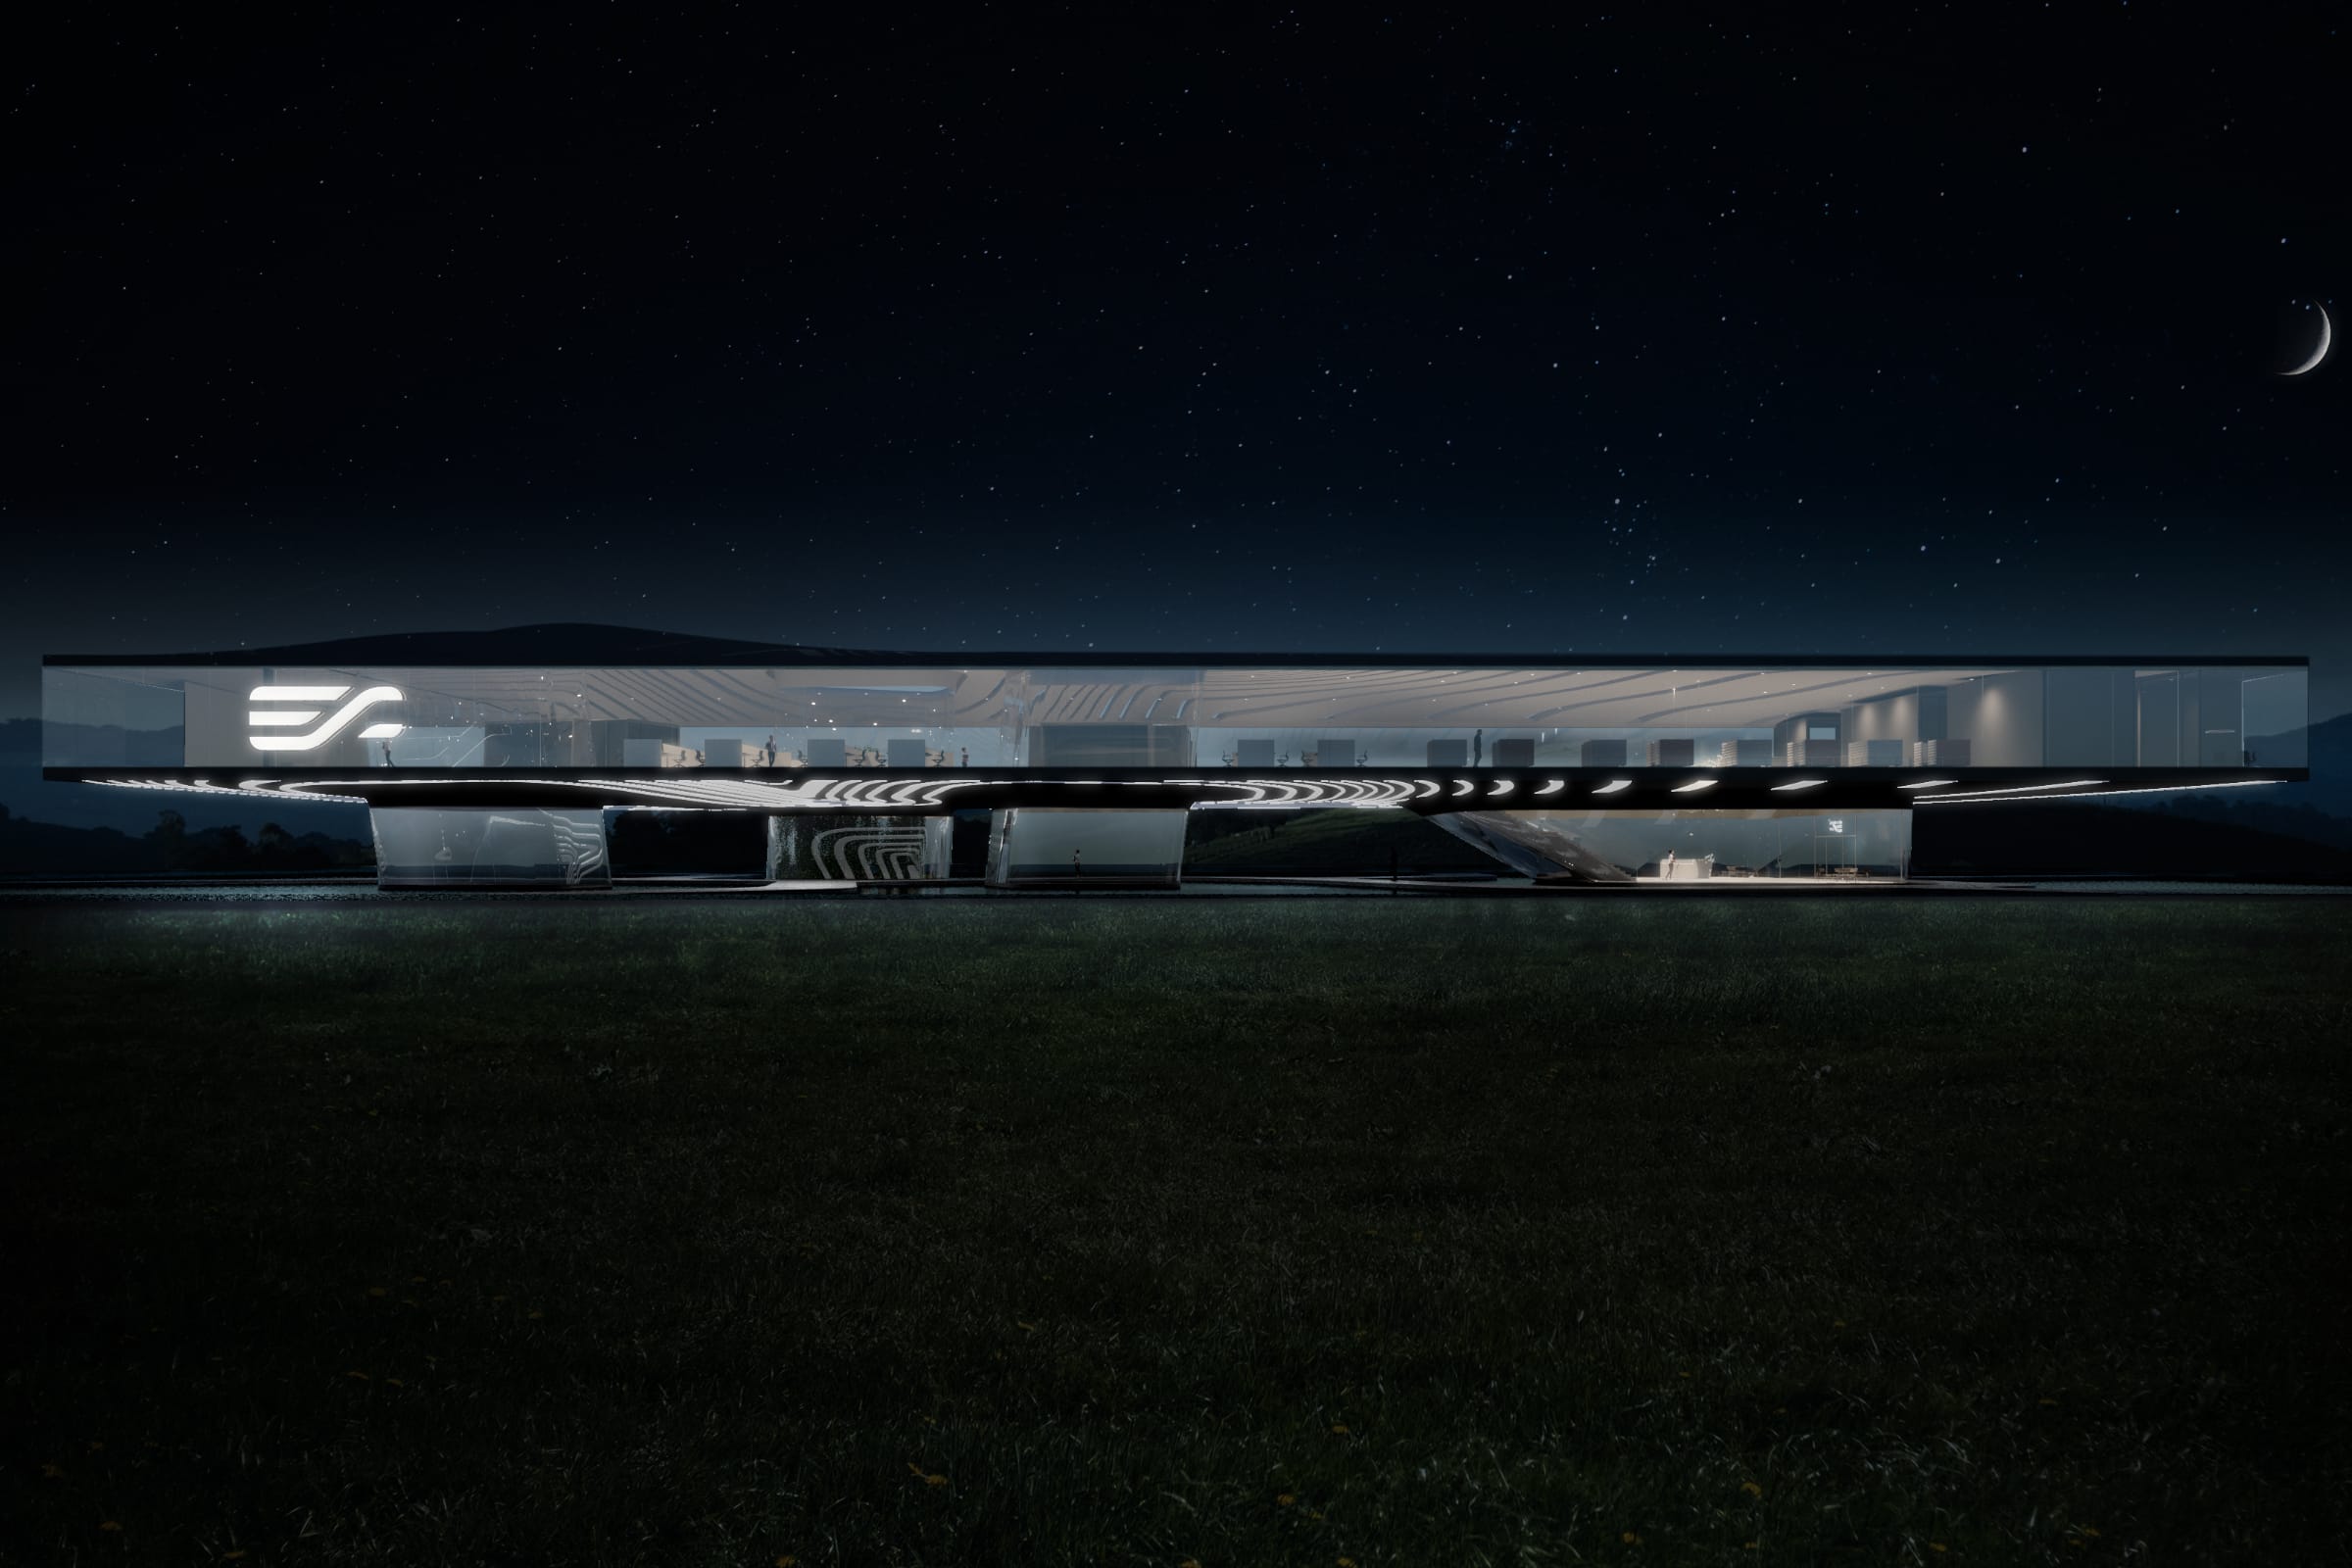 Eissmann headquarters visualization of modern futuristic office building with glass columns at night with pleasant lighting atmosphere